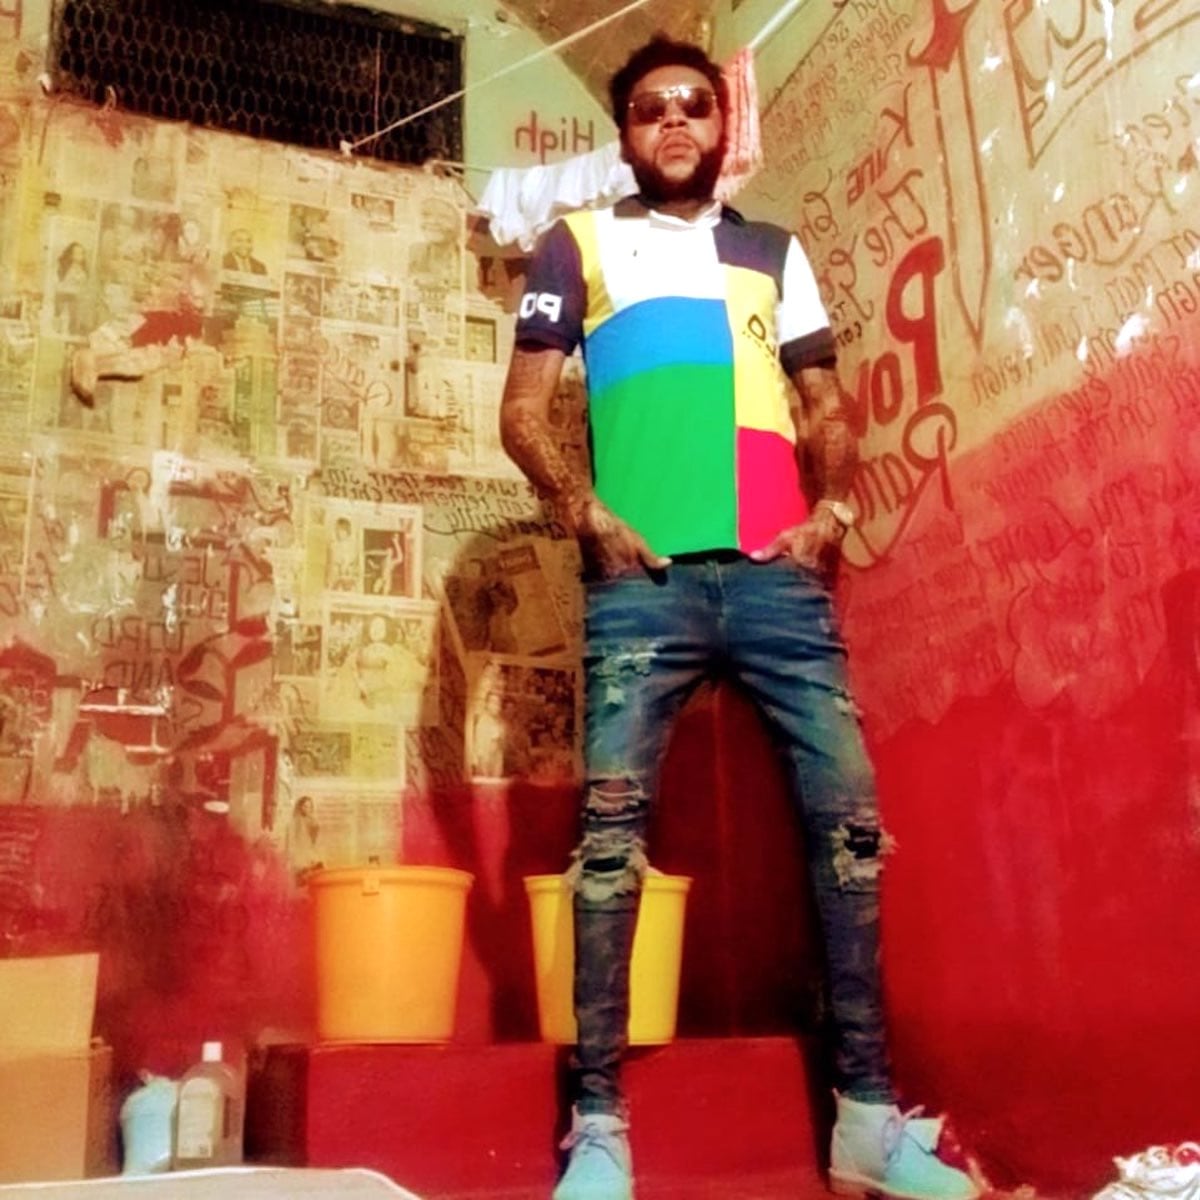 Vybz Kartel Wears Polo Shirt, Skinny Jeans, And Clarks In New Prison Photo